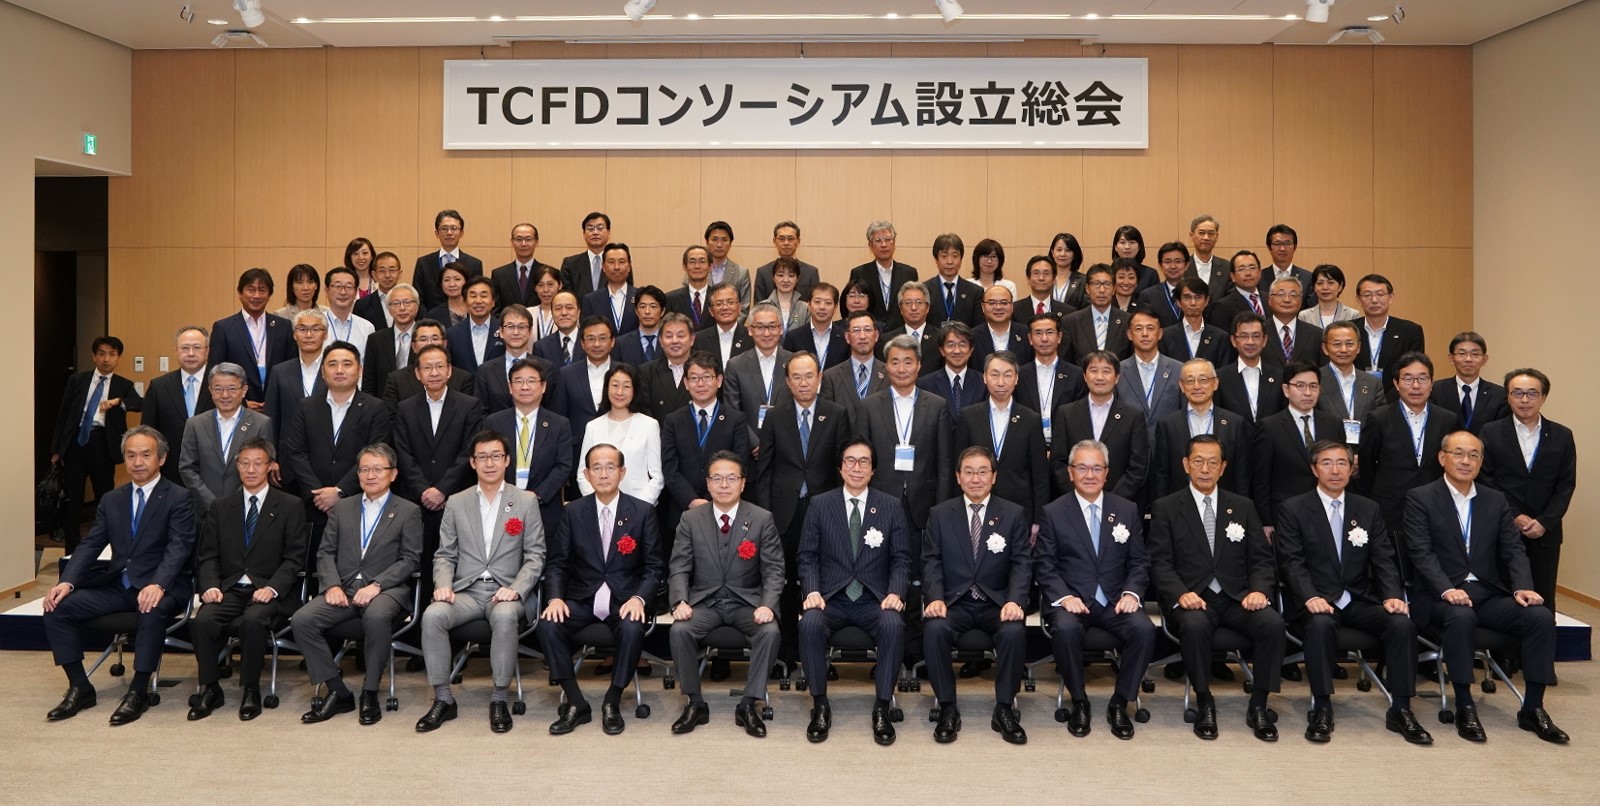 General meeting for the inauguration of the TCFD Consortium of Japan (May 27, 2019)